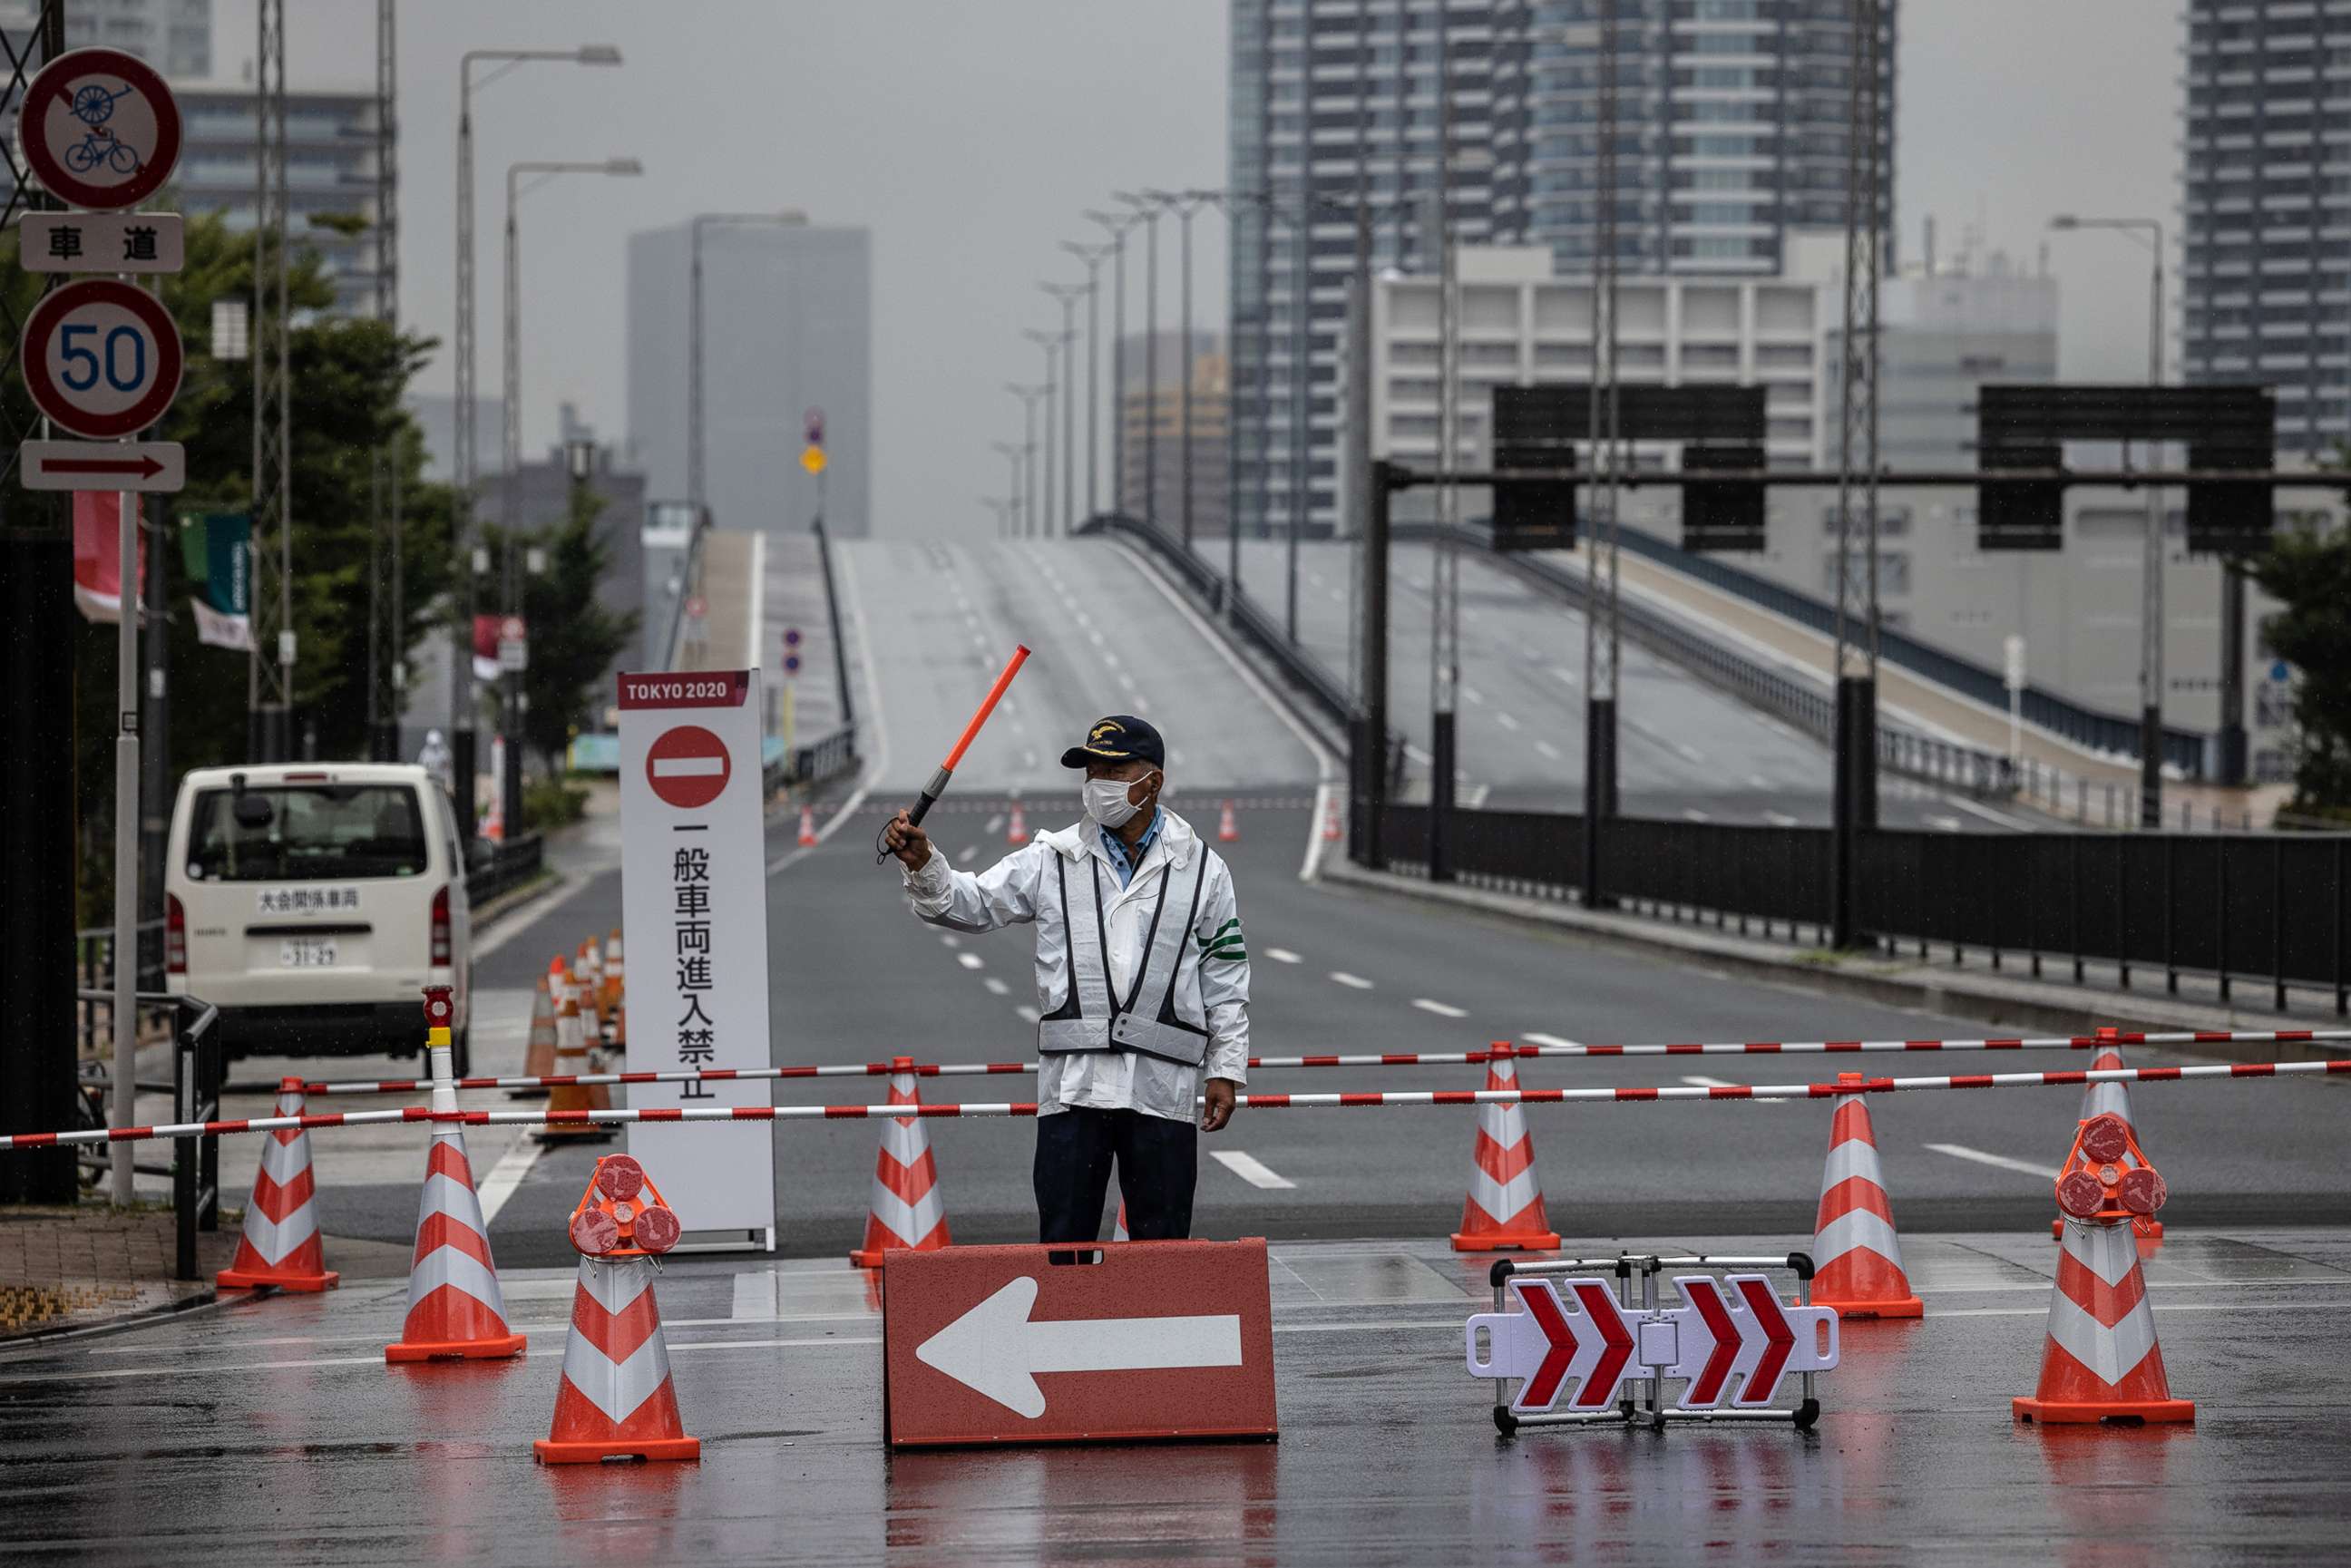 PHOTO: A security guard directs traffic at a blocked on the road leading to Toyosu Ohashi Bridge after it was restricted to Olympic vehicles only, July 8, 2021 in Tokyo, Japan.